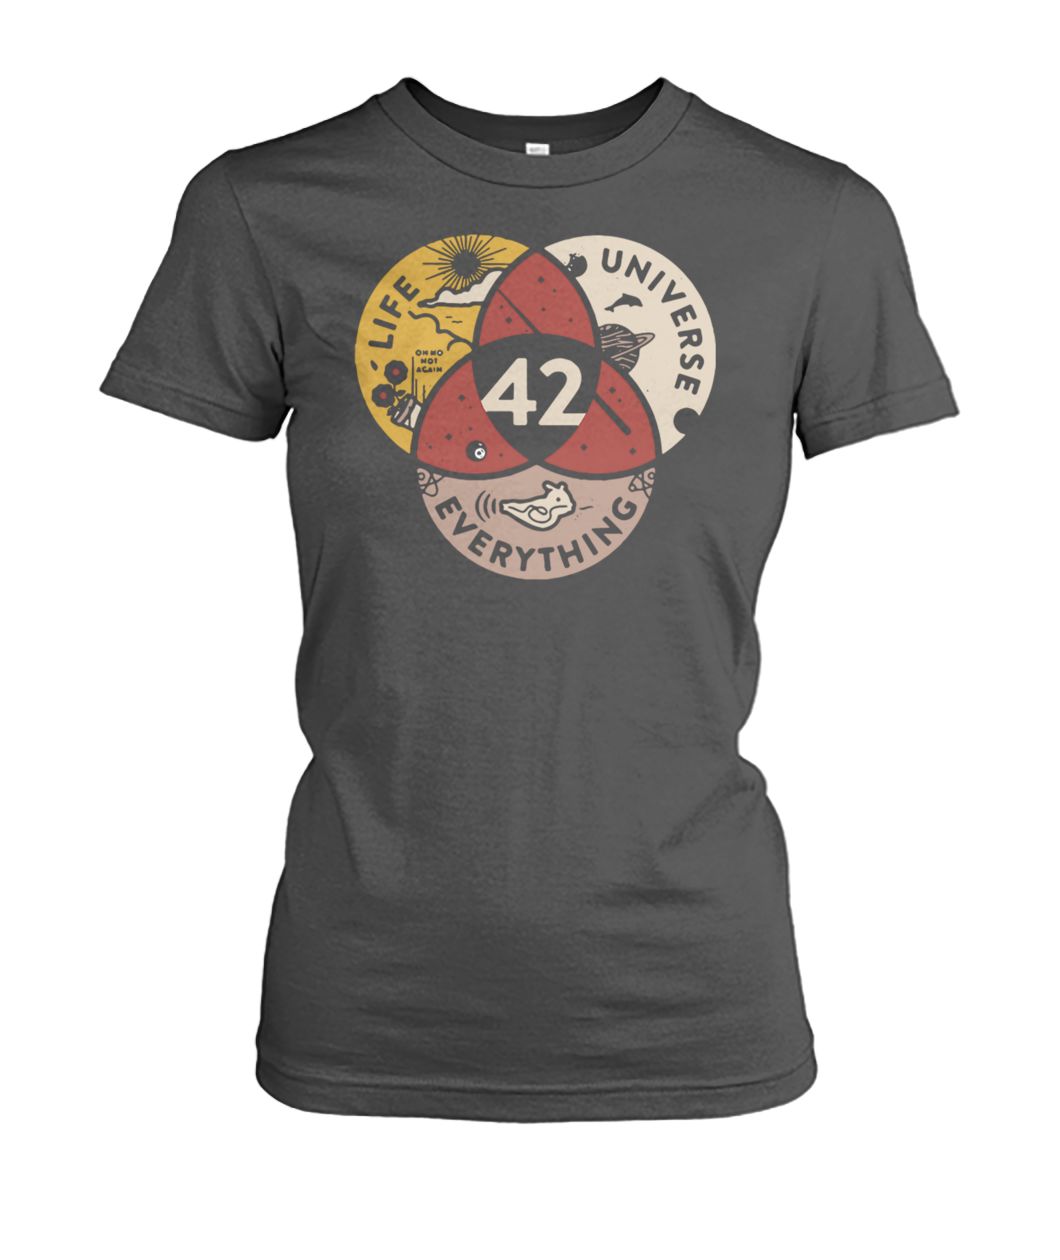 42 the answer to life the universe and everything women's crew tee